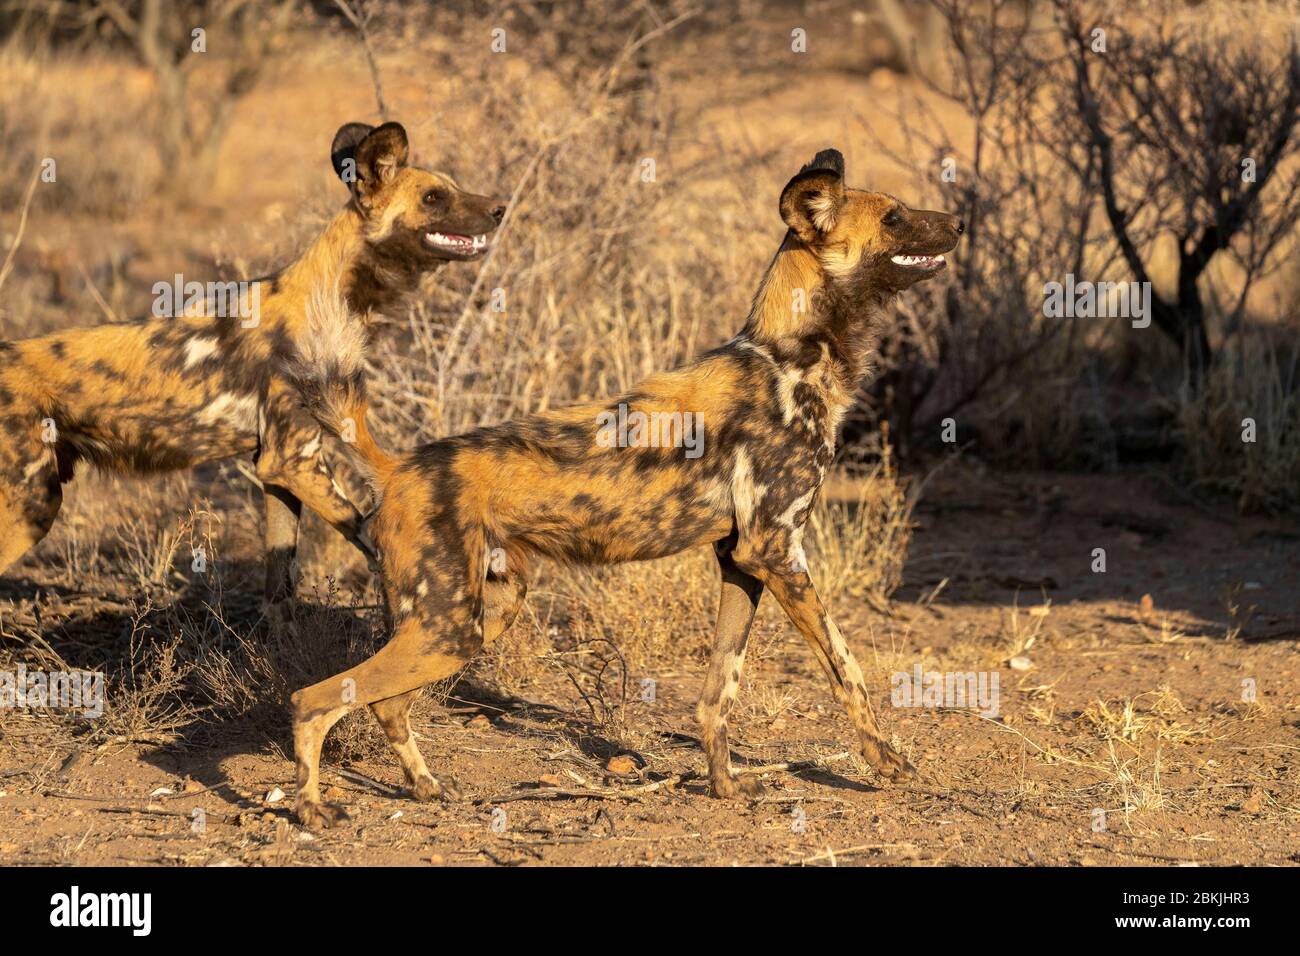 Namibia, Private reserve, African wild dog or African hunting dog or African painted dog (Lycaon pictus), adult, captive Stock Photo